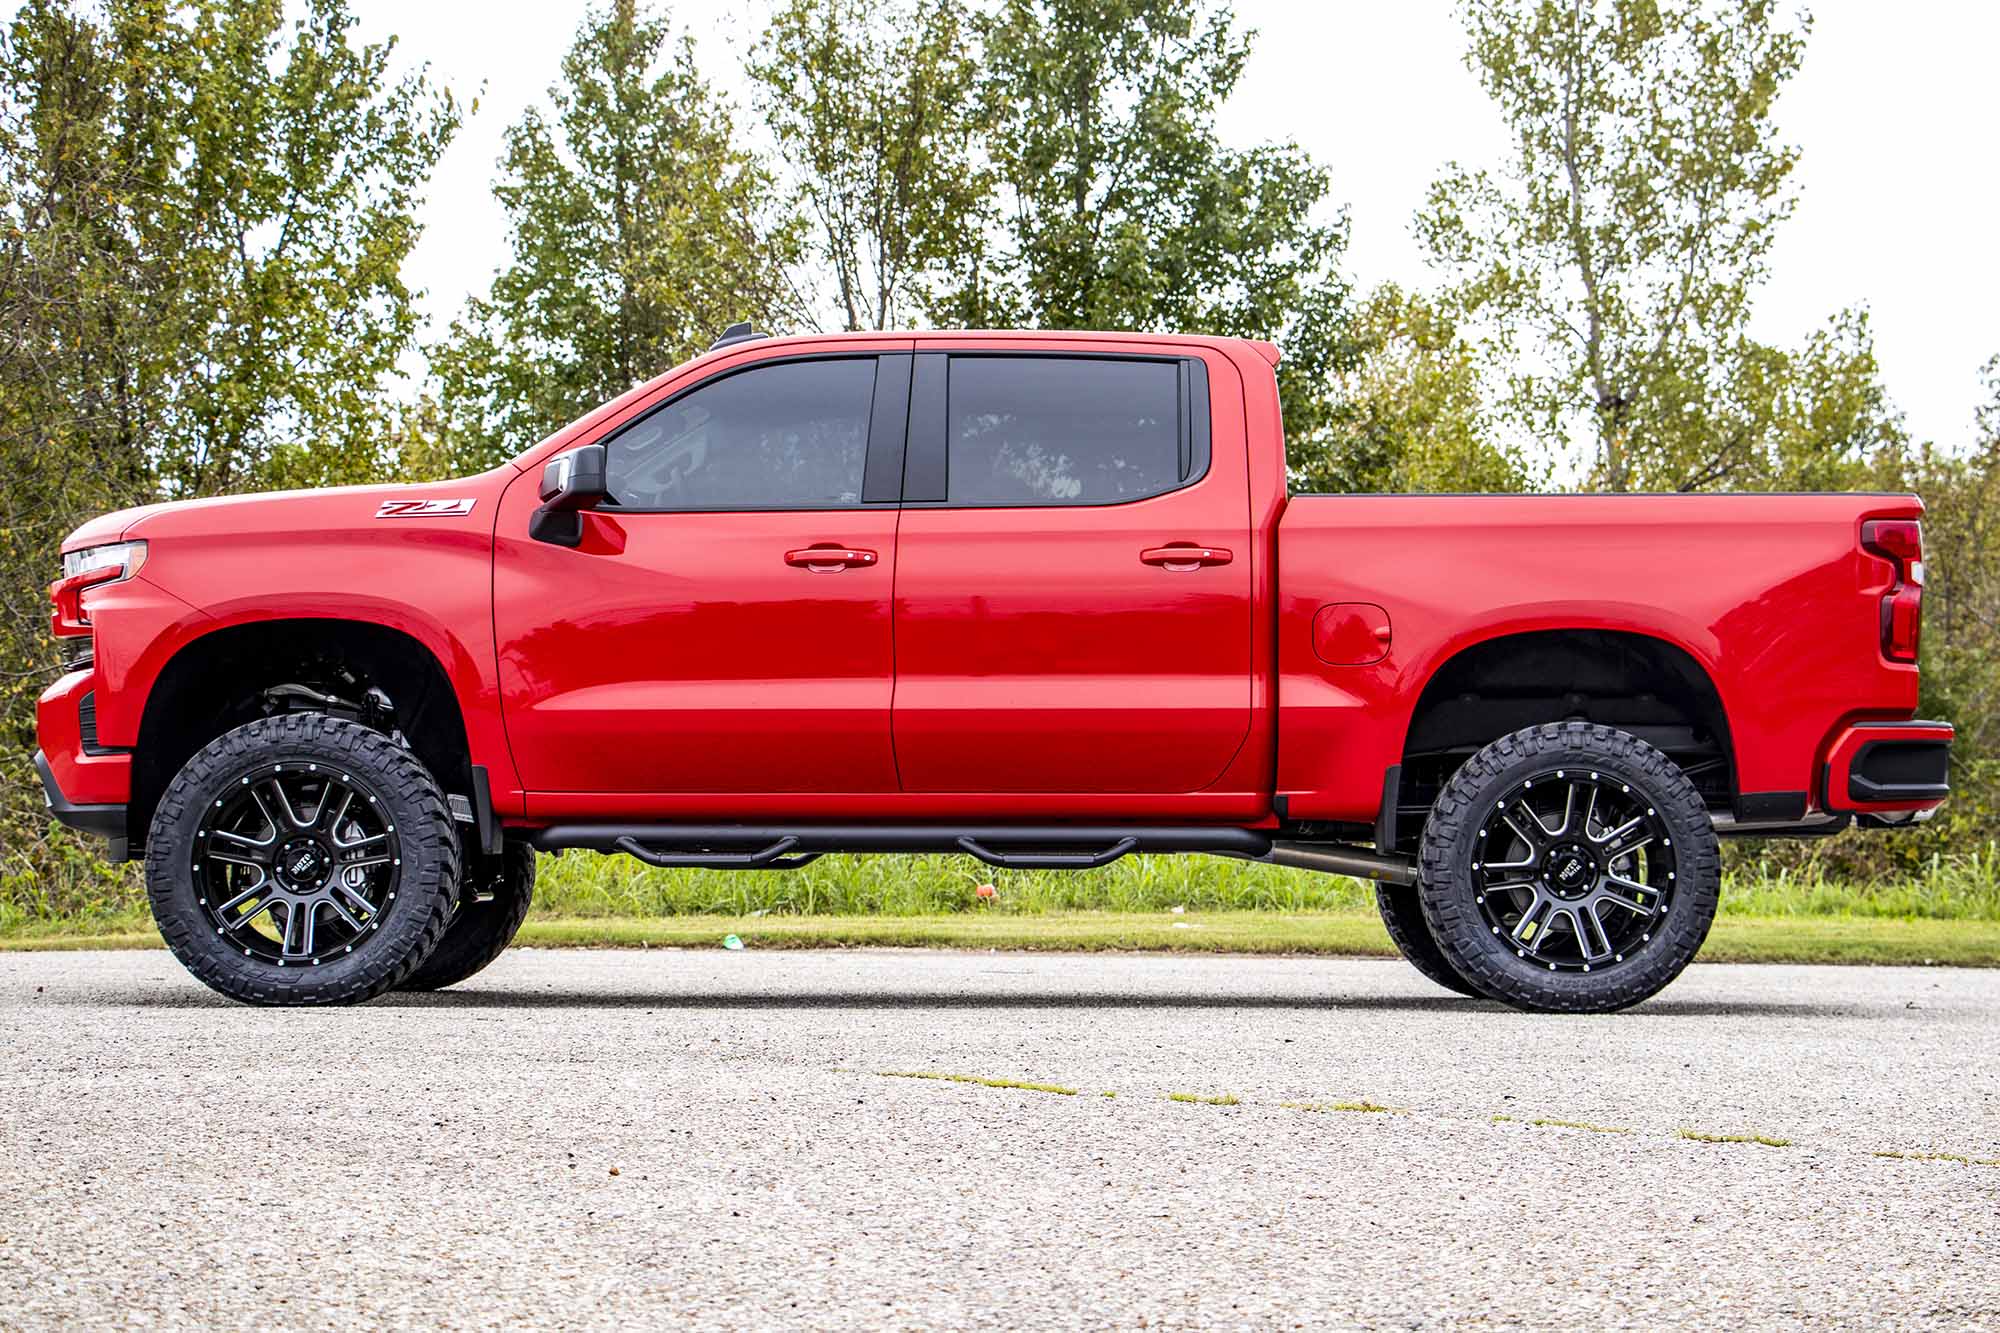 6 Inch Lift Kit For 2019 Chevy Silverado 1500 By Rough Country